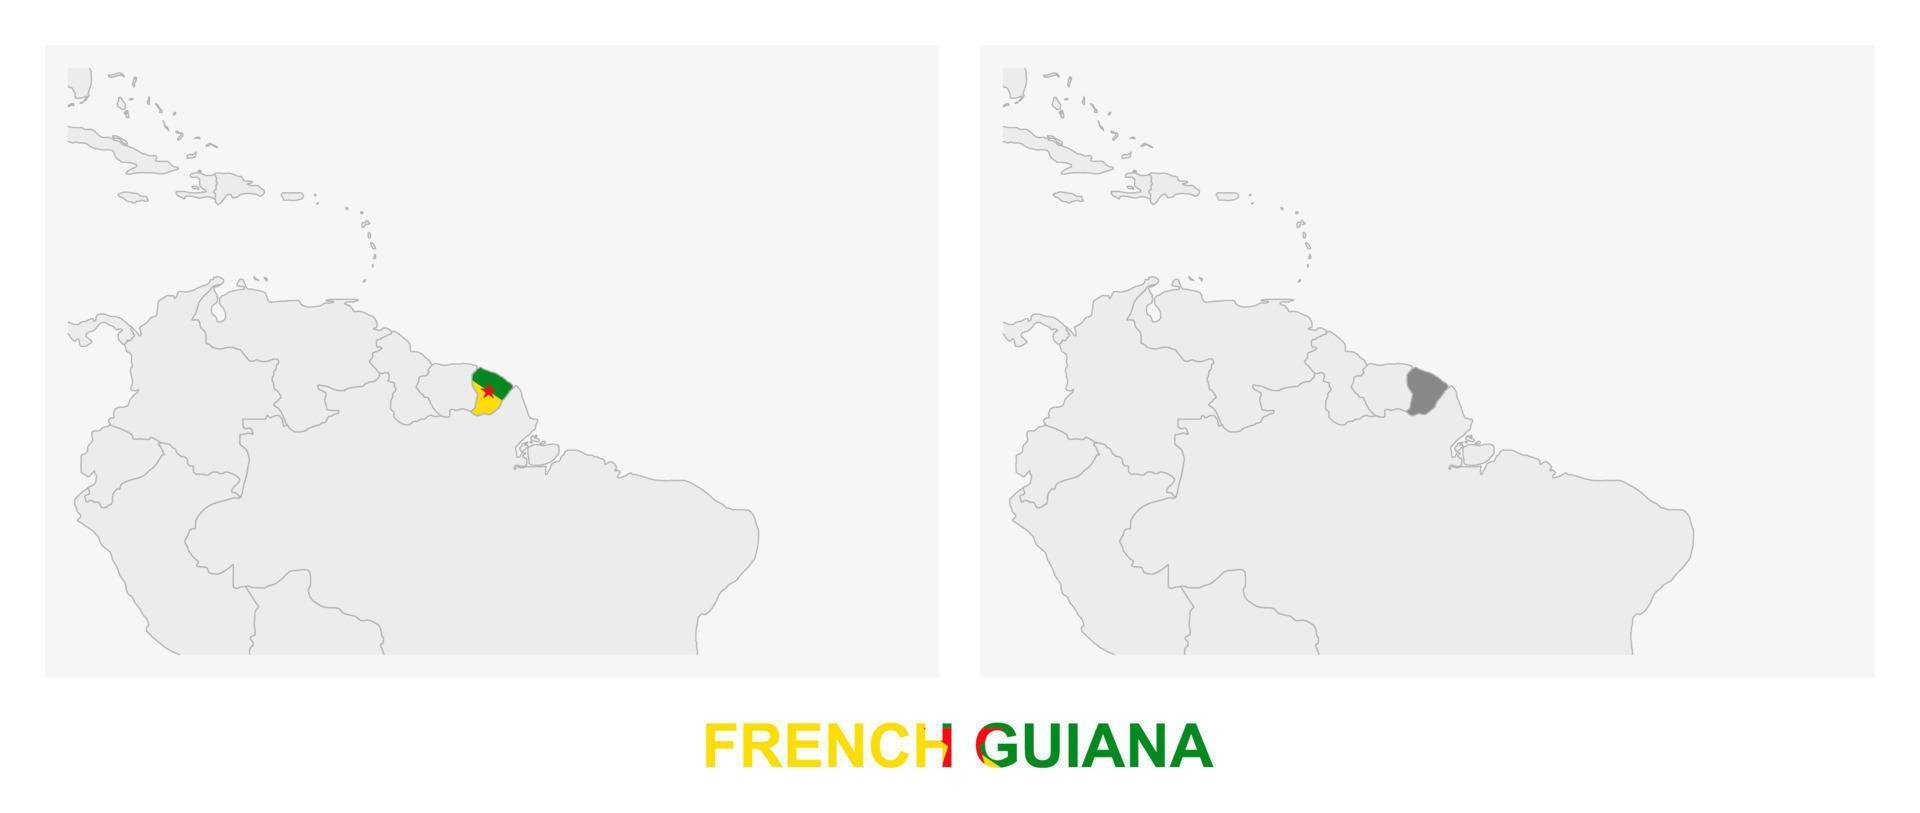 Two versions of the map of French Guiana, with the flag of French Guiana and highlighted in dark grey. vector